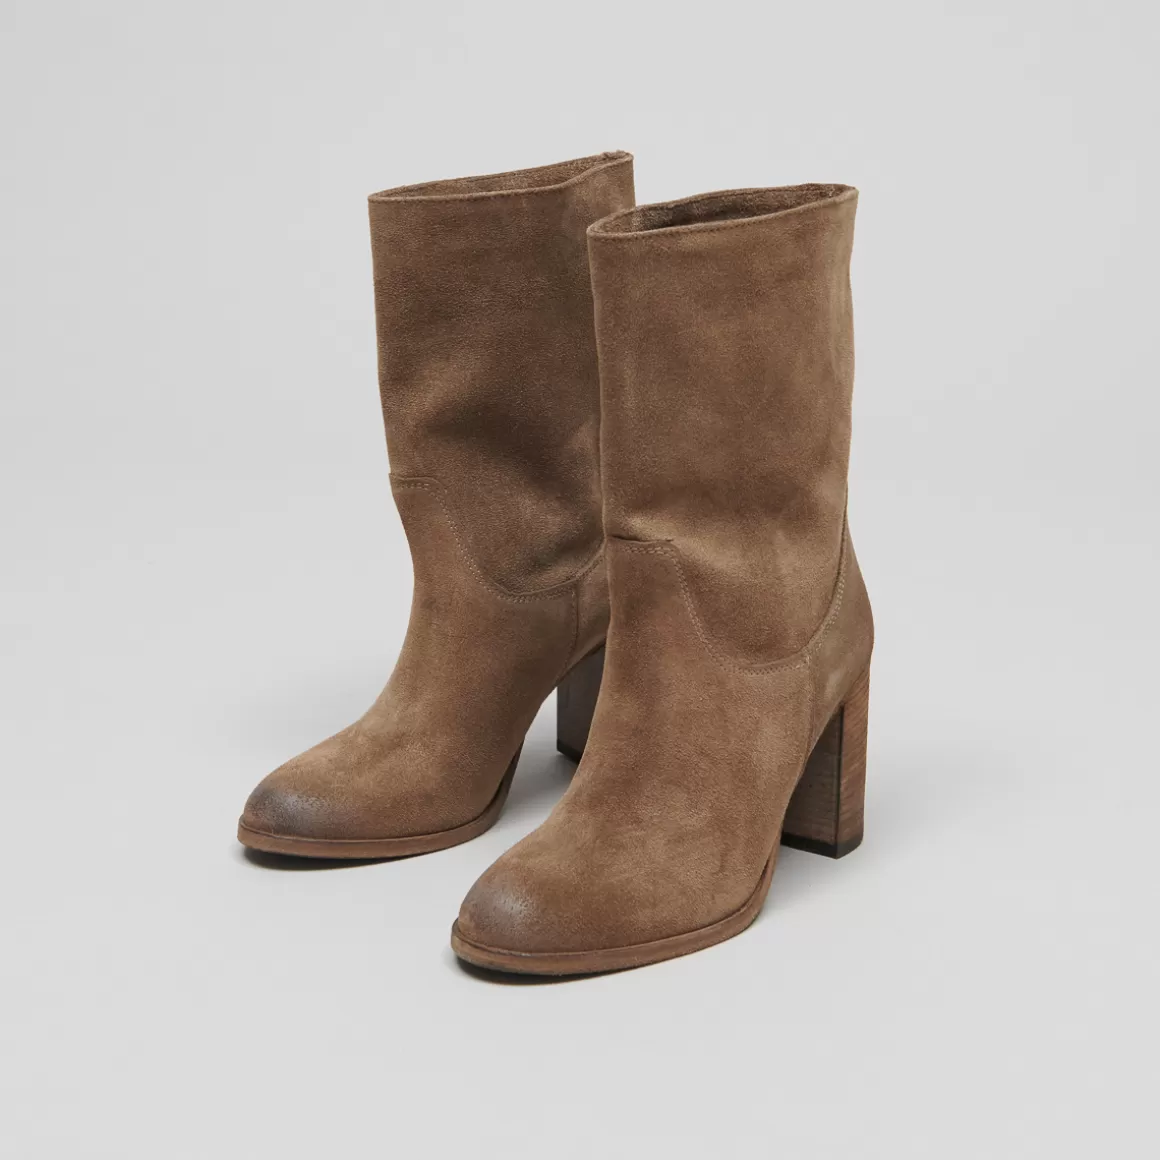 Boots with heels and oval toes<Jonak Discount